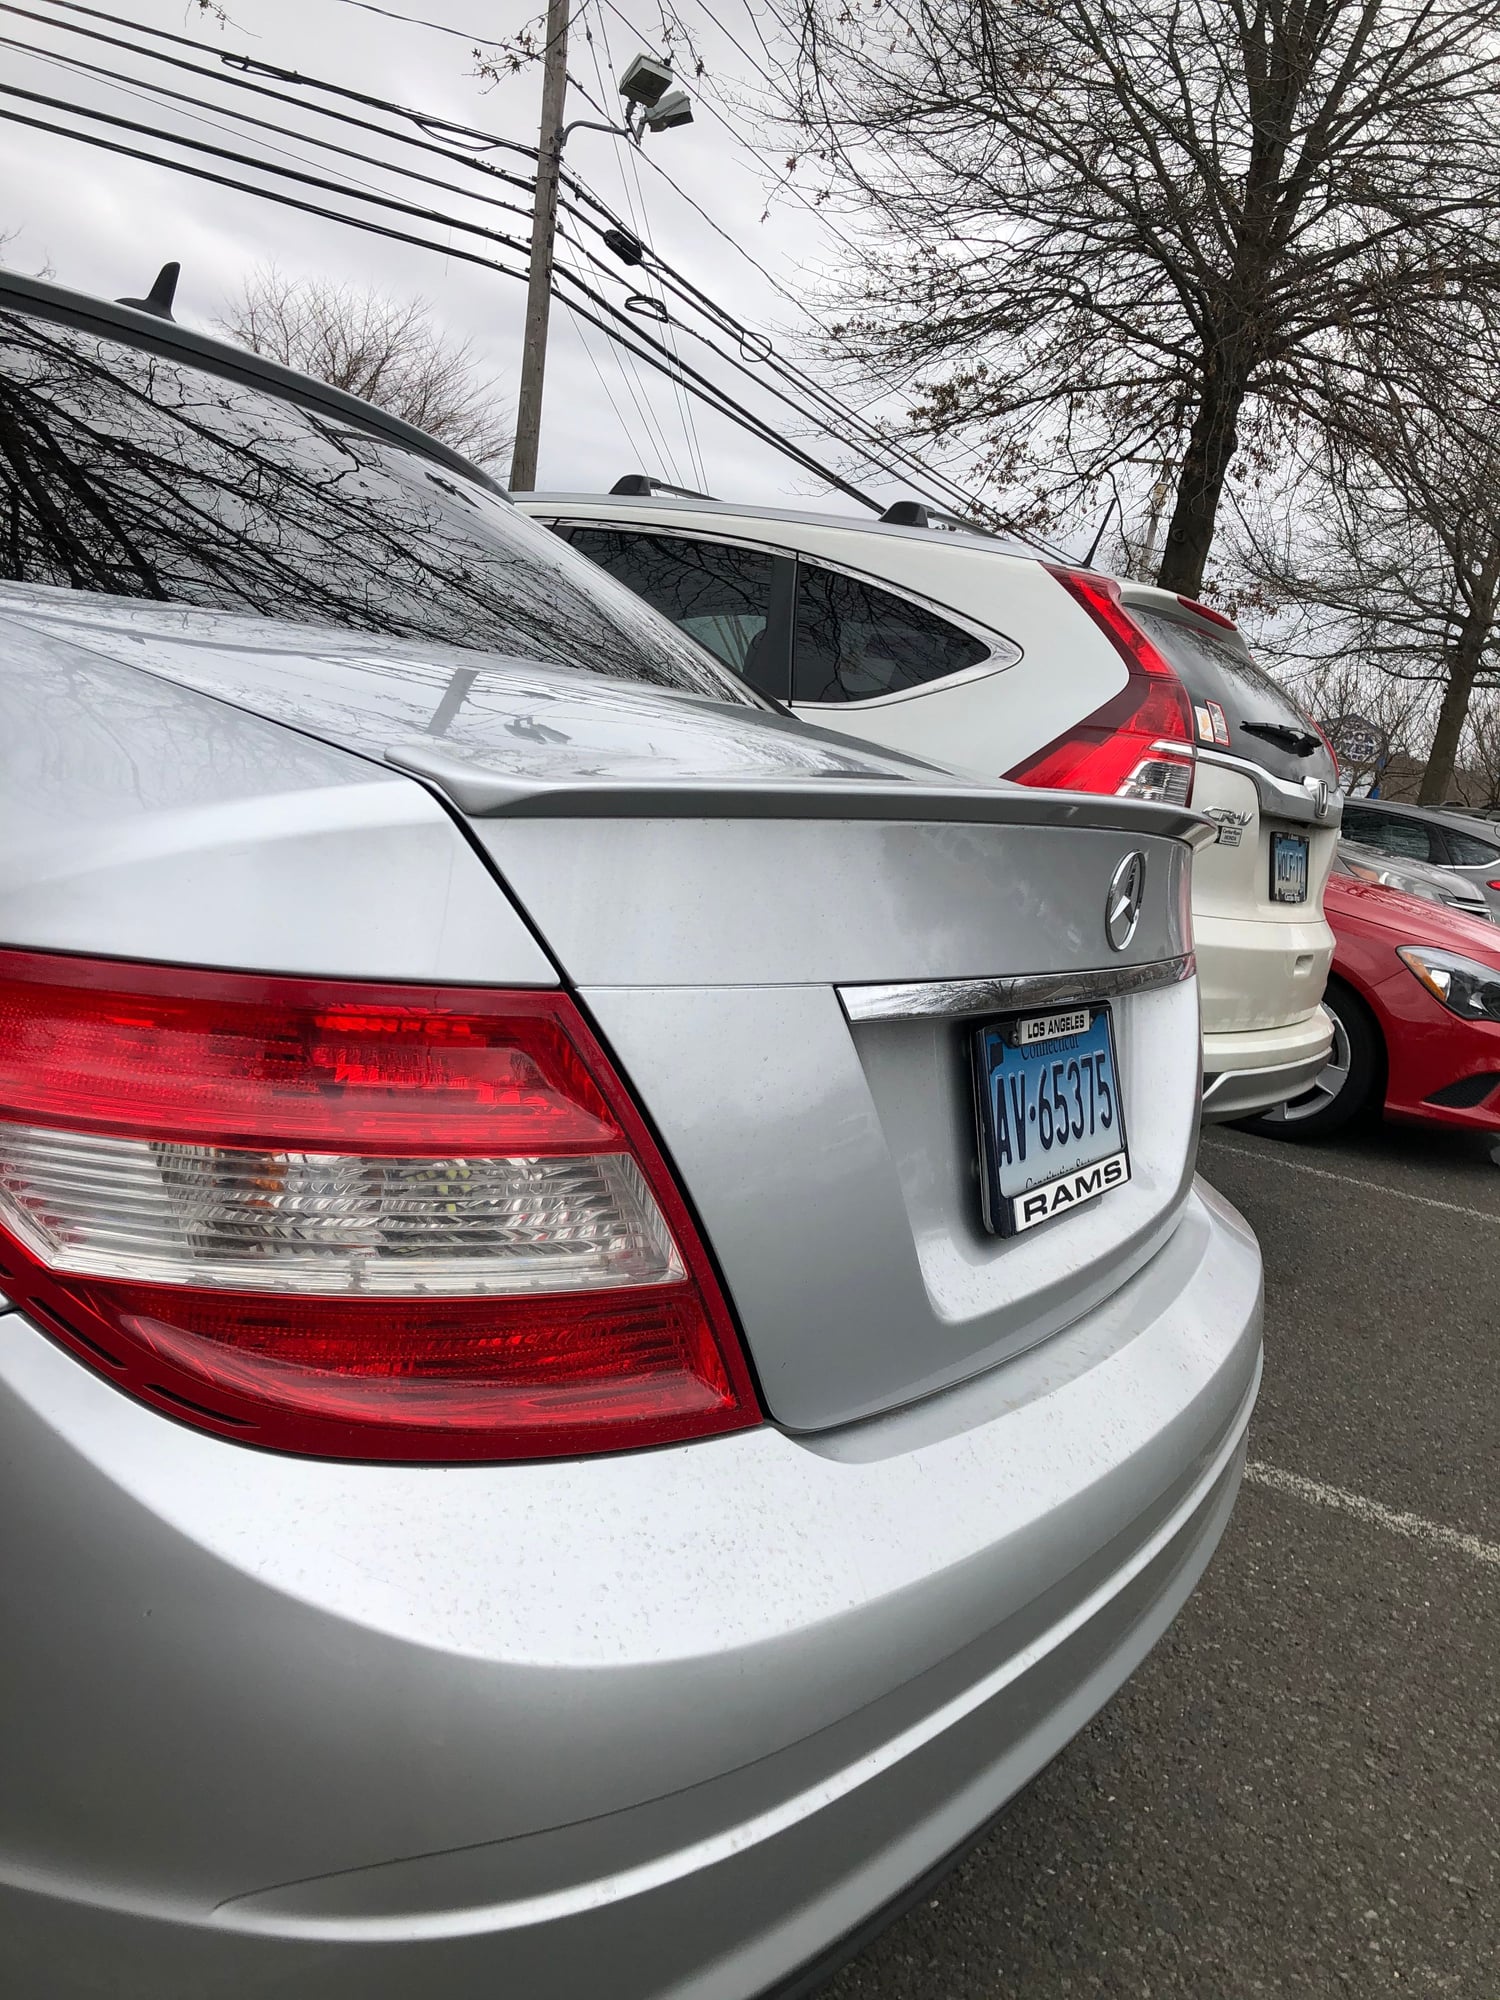 Exterior Body Parts - w204 AMG Style Spoiler / Wing - Used - 2008 to 2014 Mercedes-Benz C300 - Danbury, CT 06811, United States